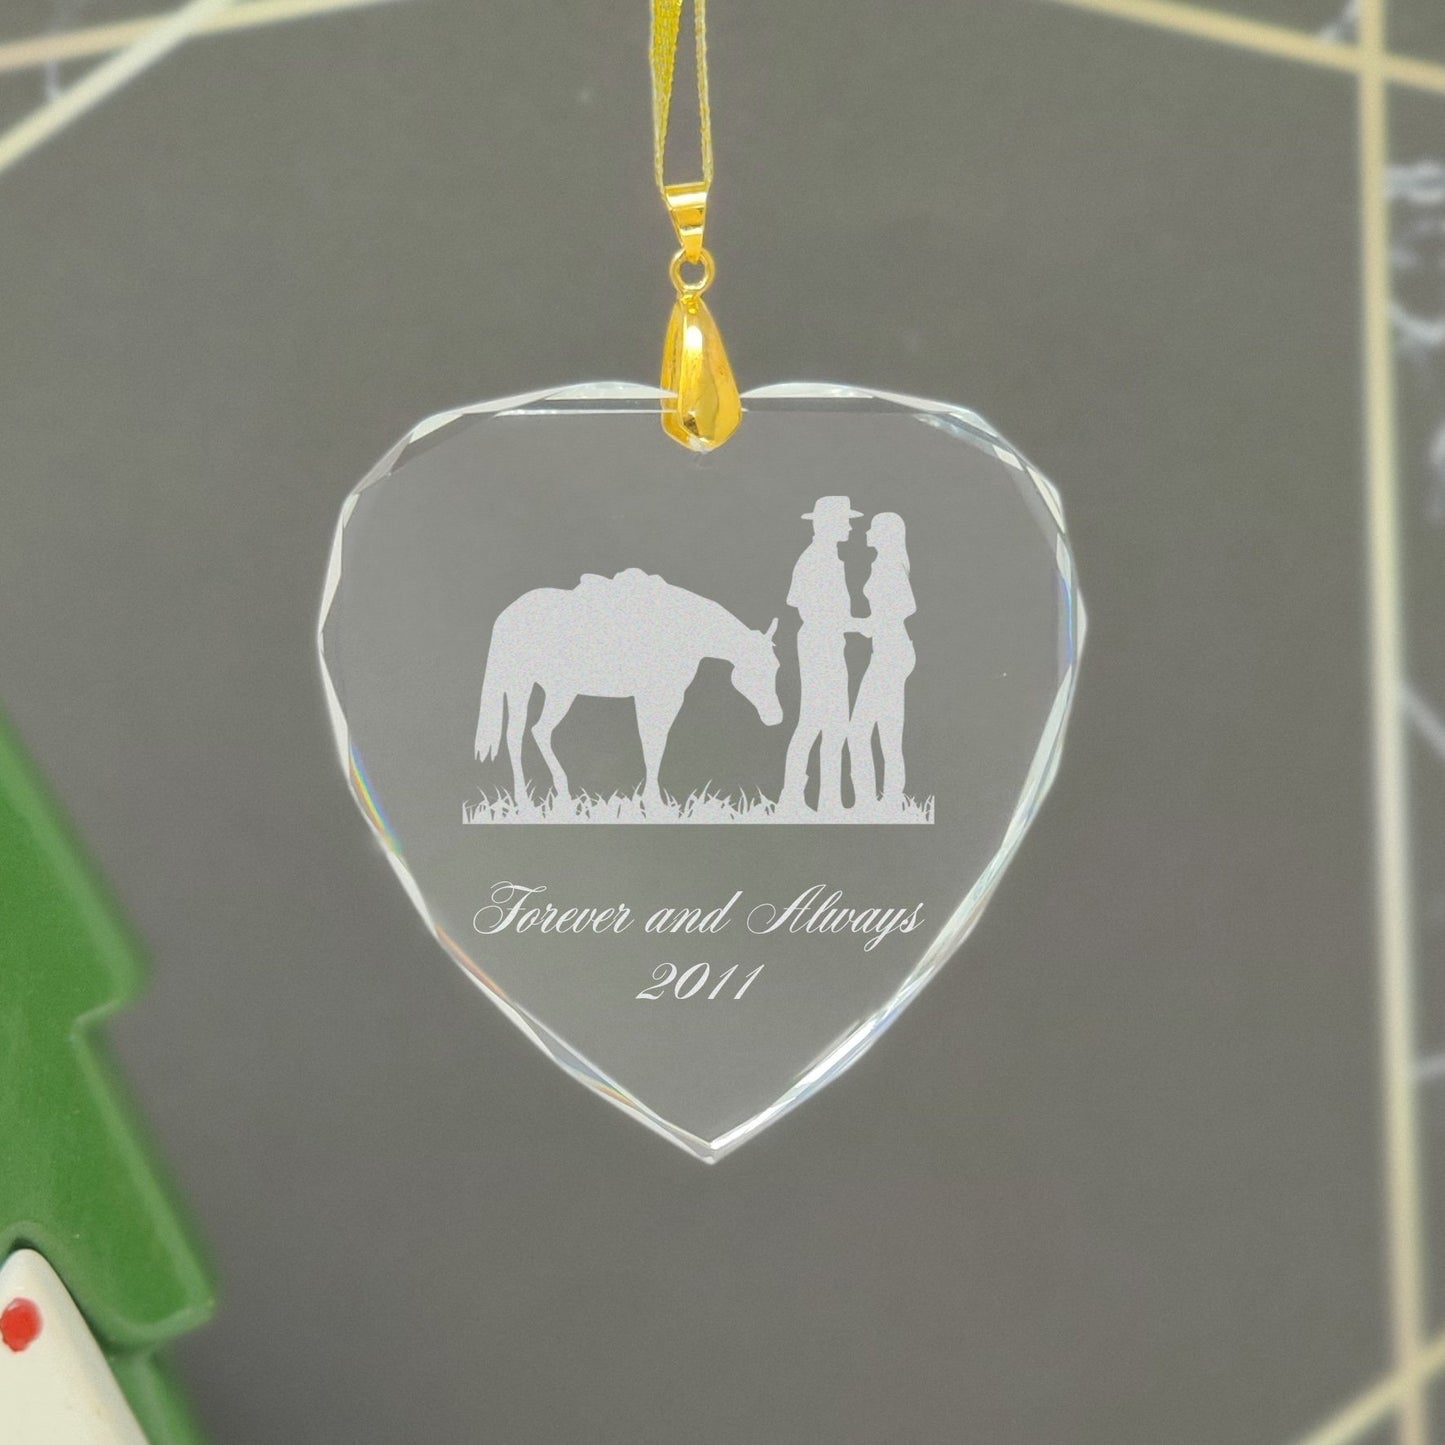 LaserGram Christmas Ornament, Horse Racing, Personalized Engraving Included (Heart Shape)